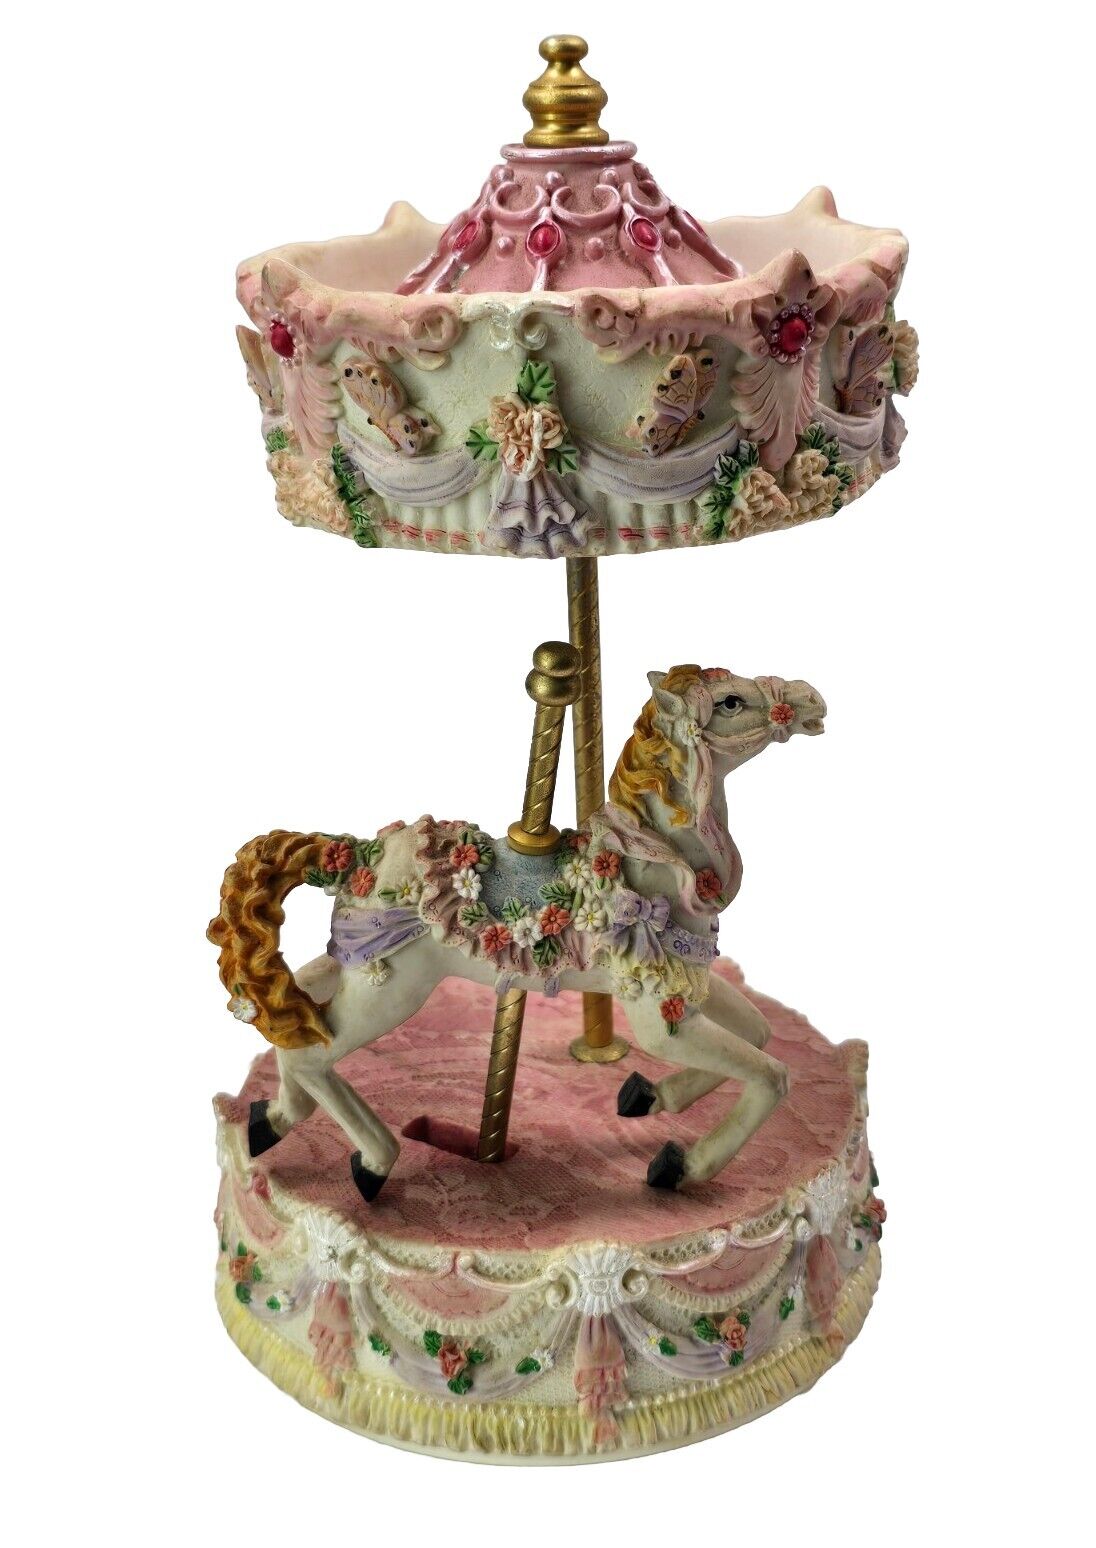 Carousel Music Box Playing Dance Of The Sugar Plum Fairy.  Floral Accents. 